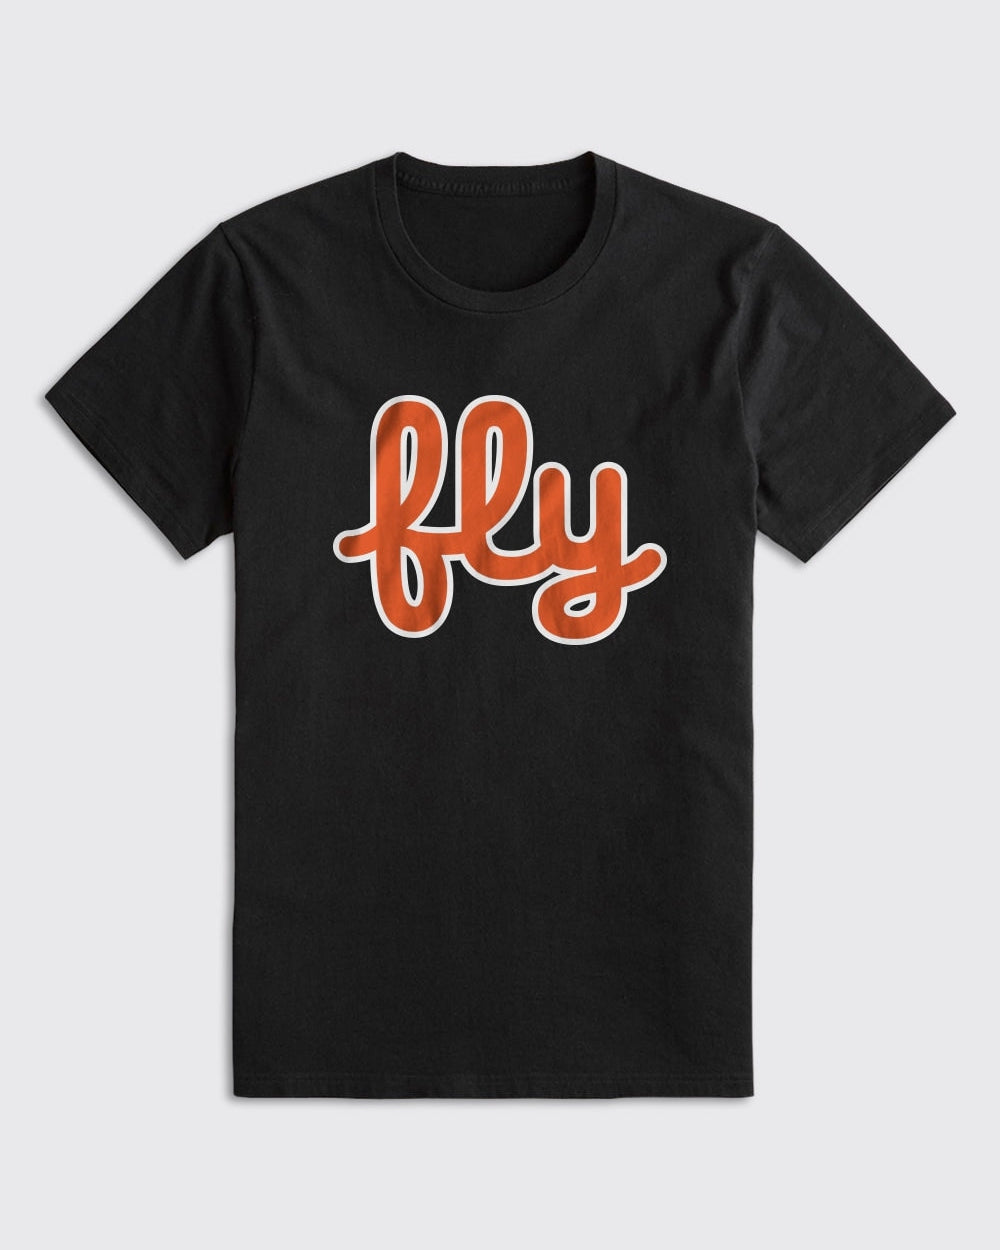 Flyers Fly Shirt - Flyers, T-Shirts - Philly Sports Shirts